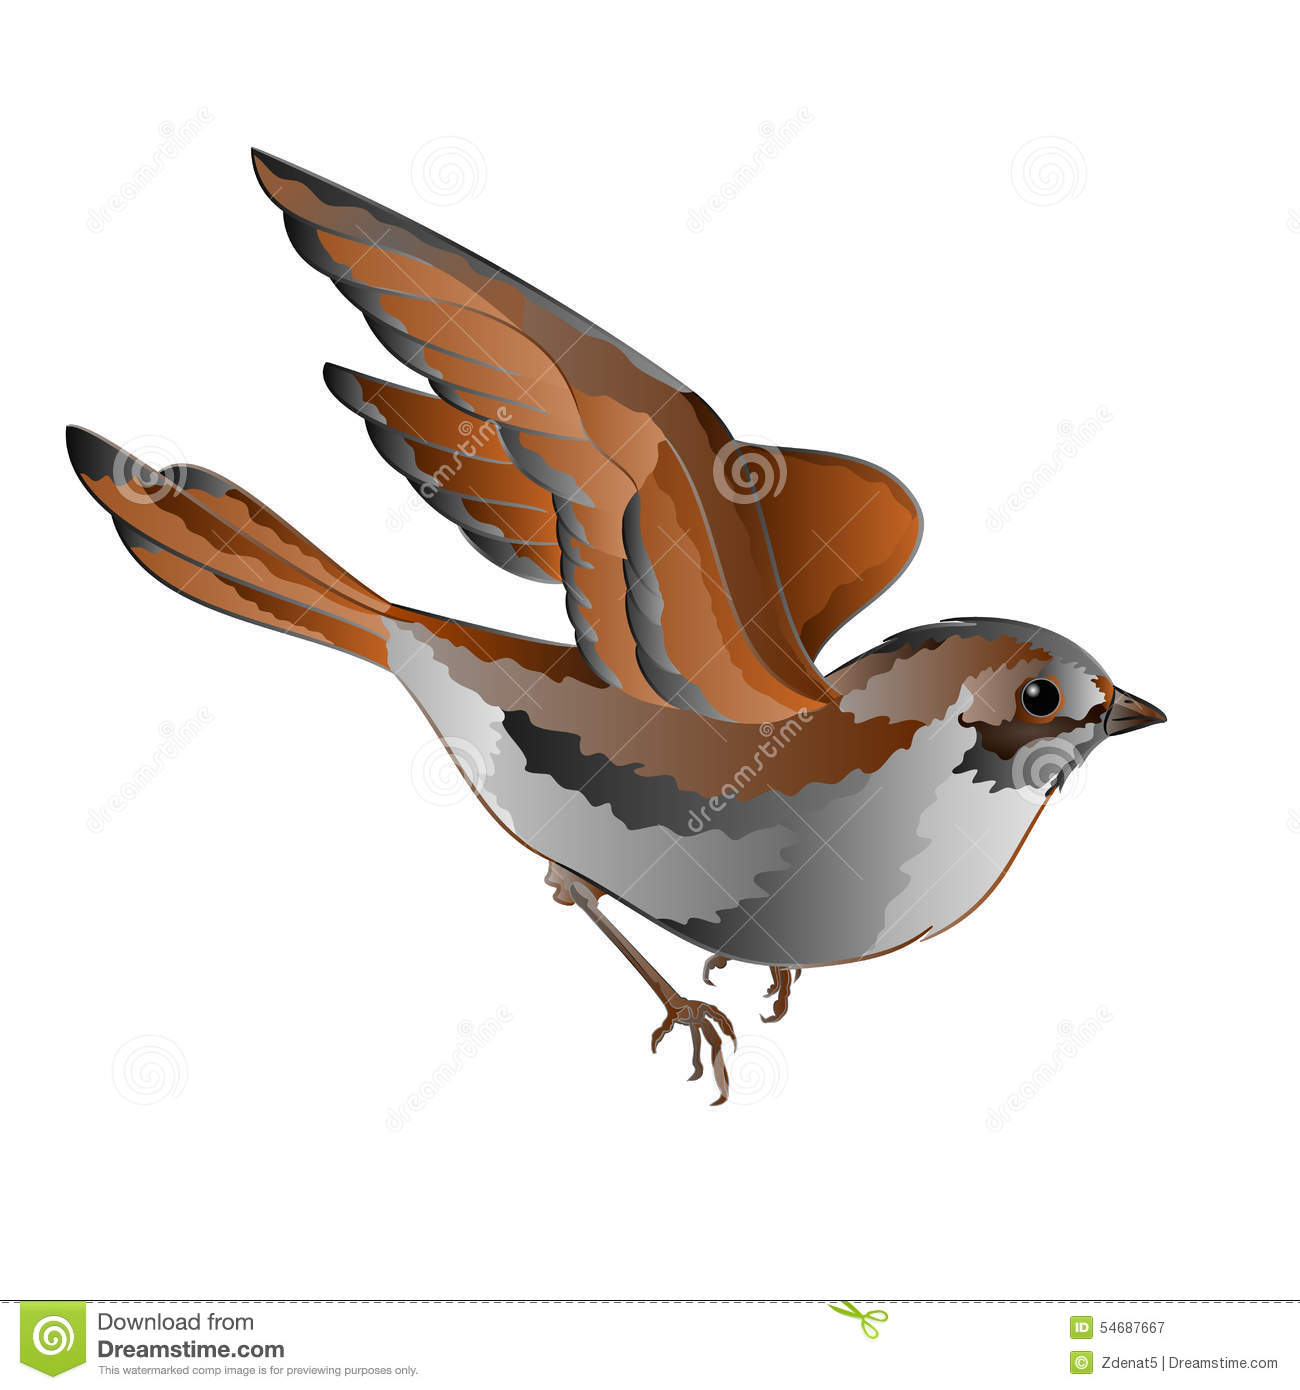 Passer Domesticus House Sparrow Stock Illustrations.